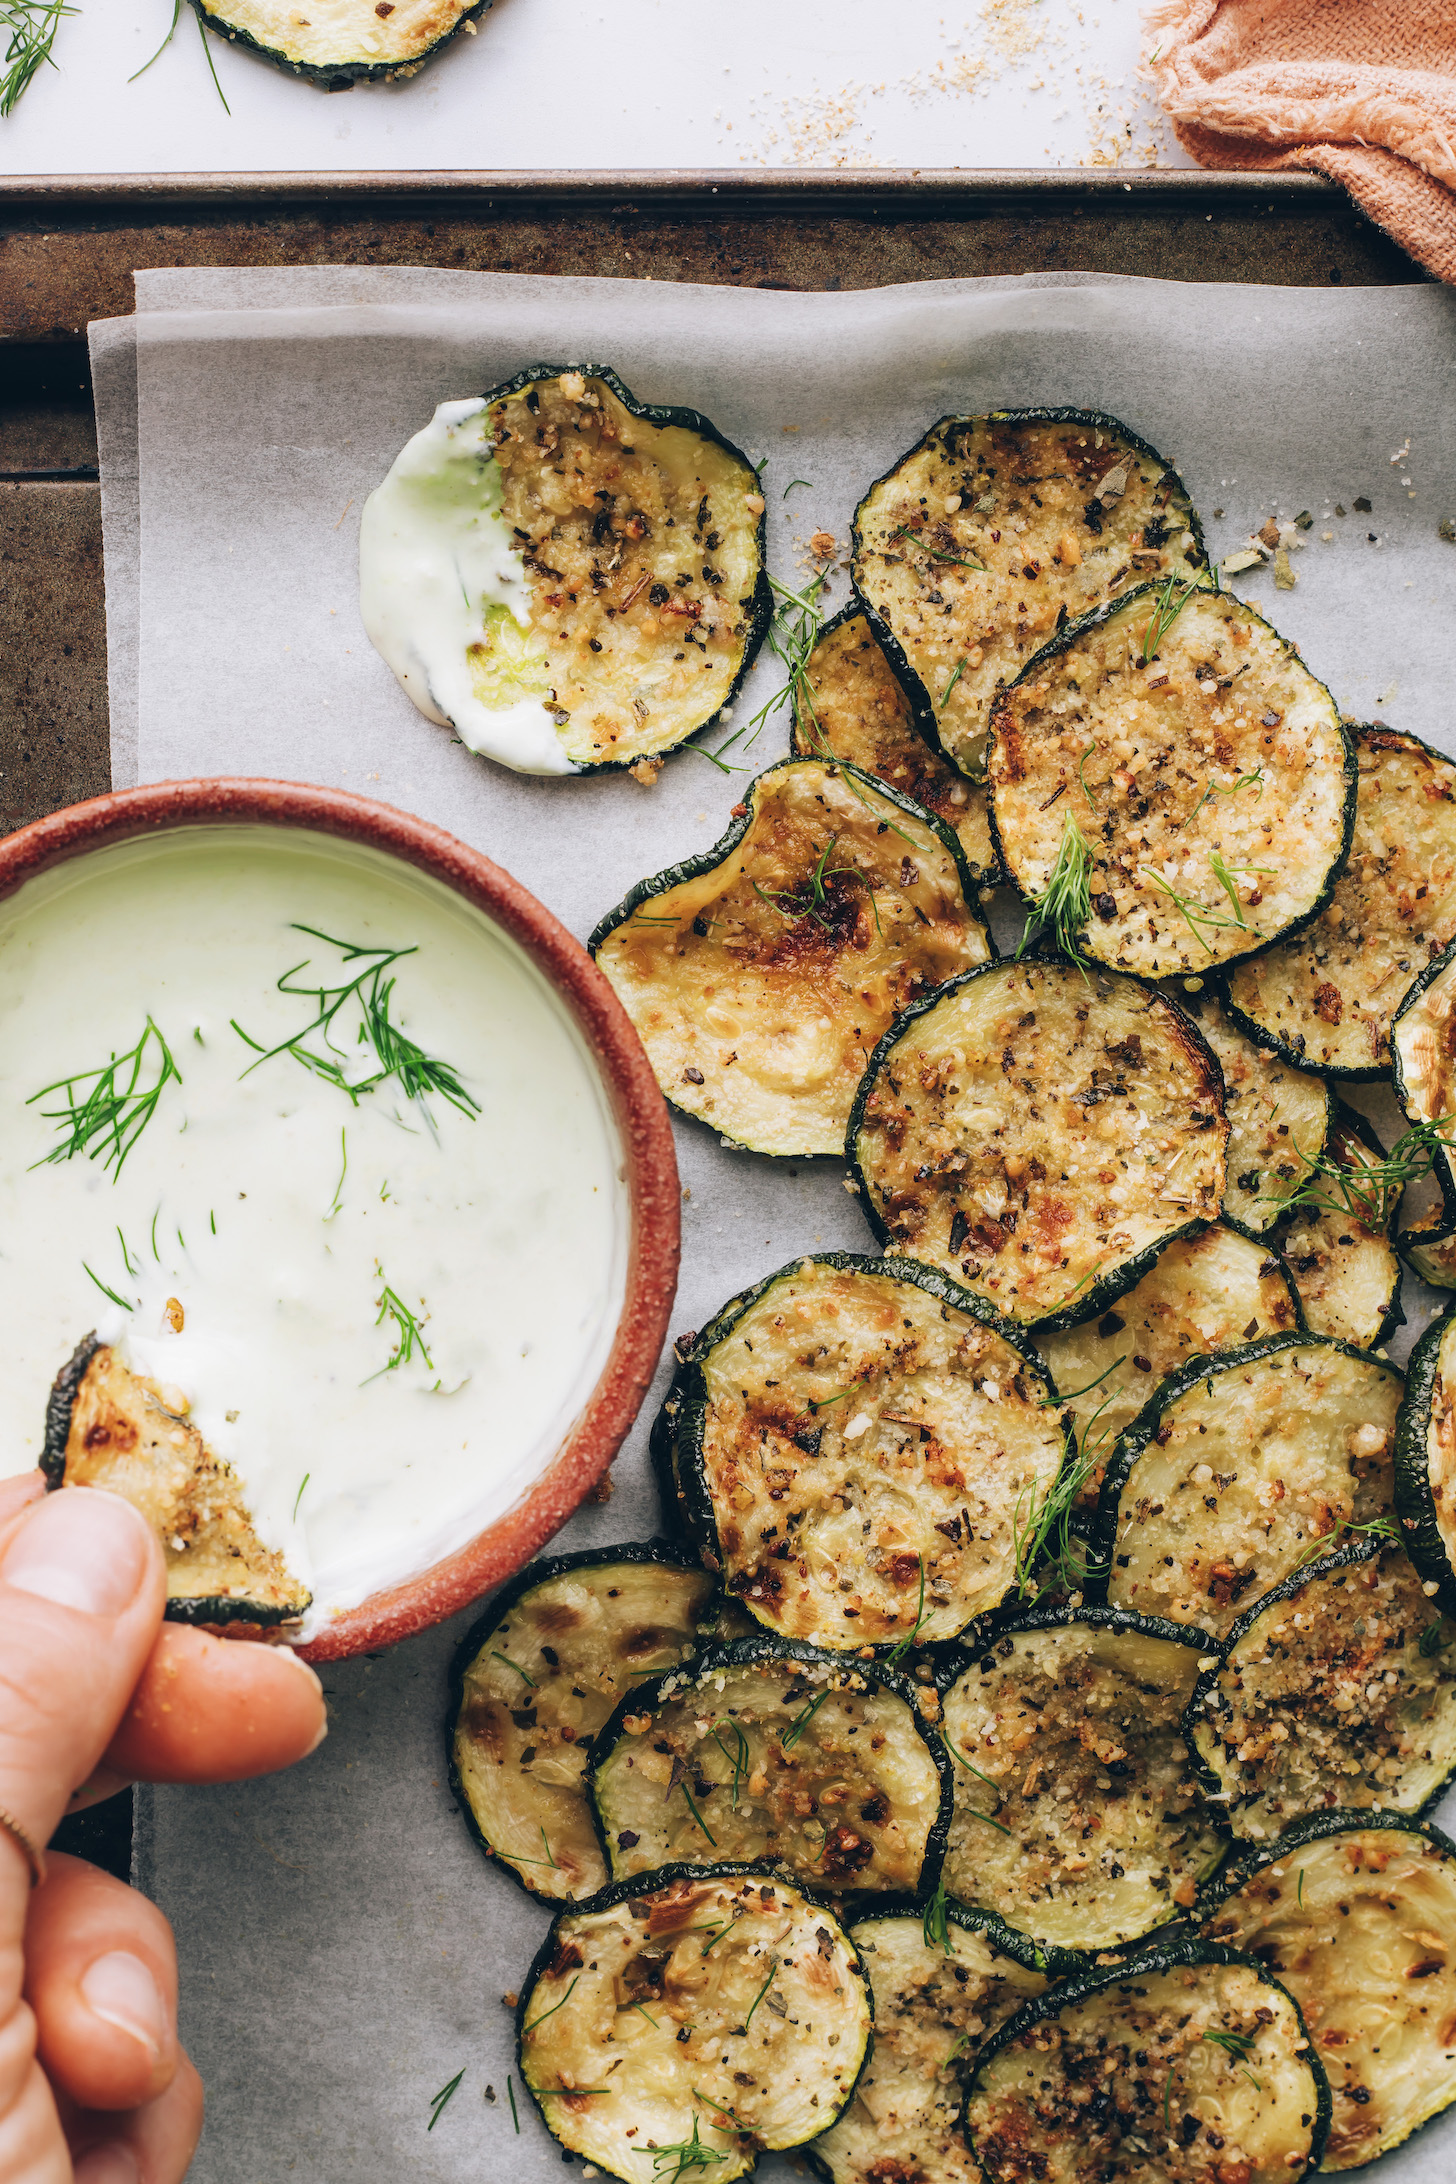 Dipping a caramelized zucchini slice into a bowl of ranch